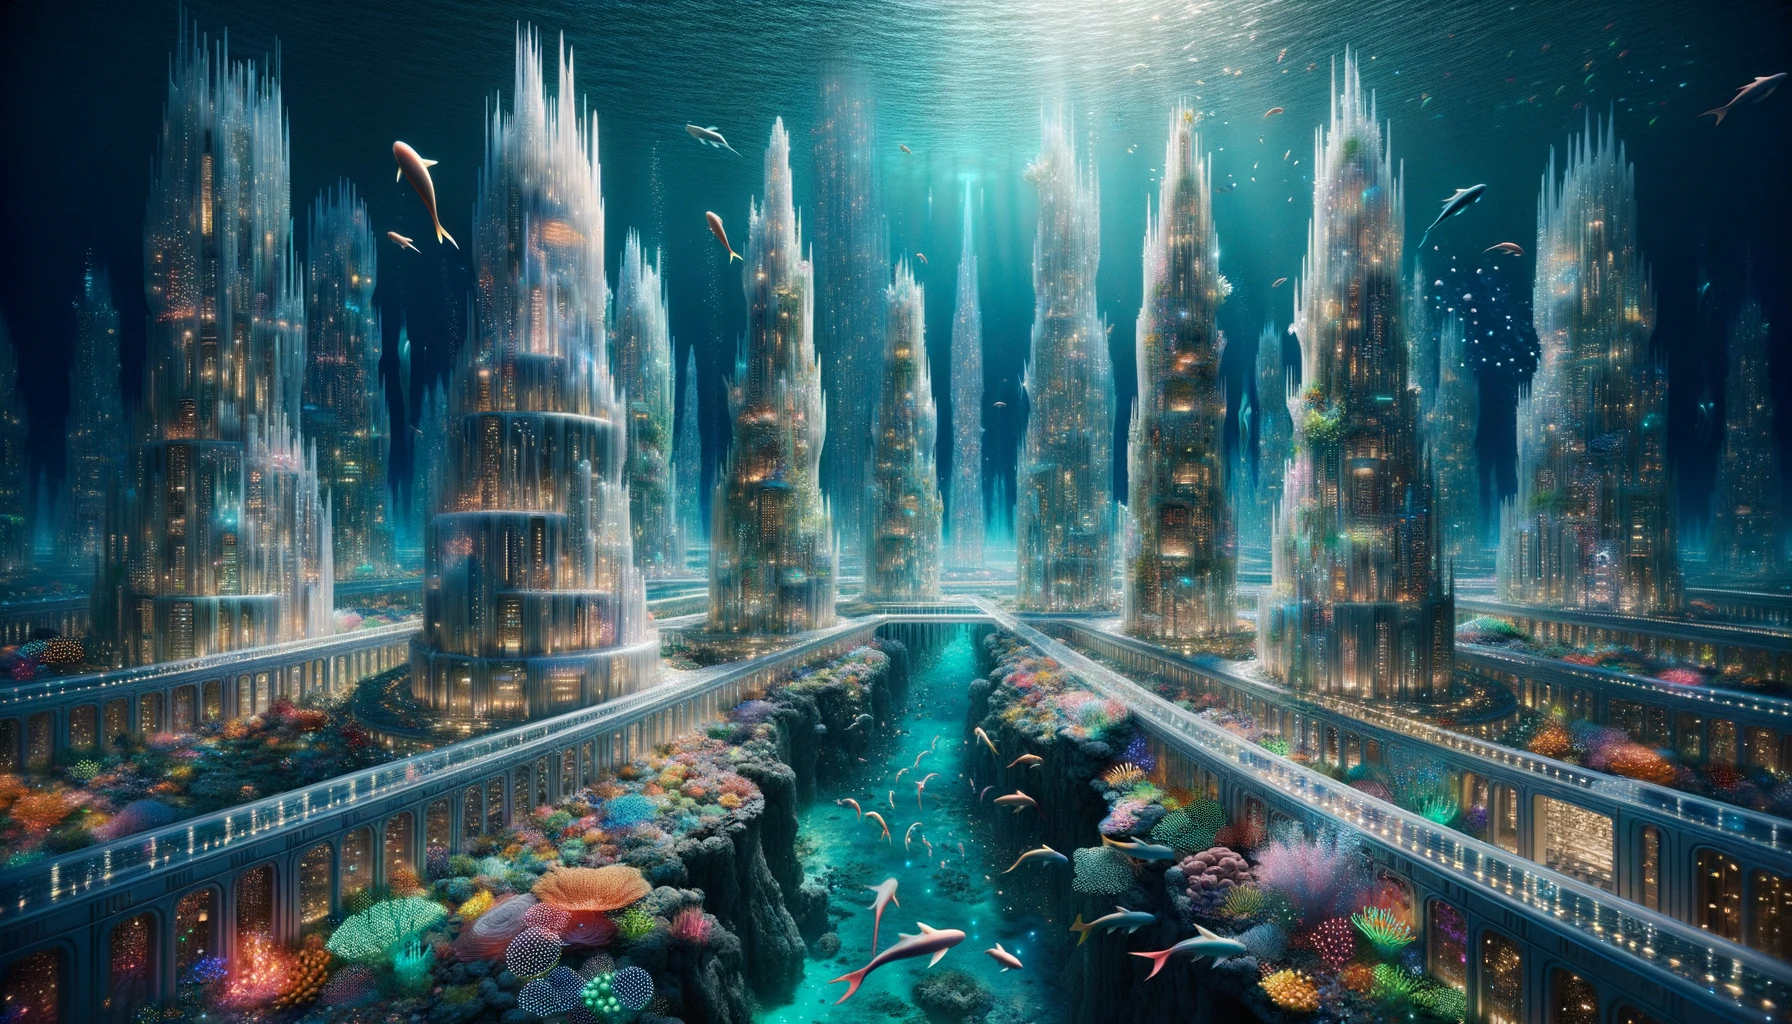 Photo of an underwater metropolis, where architecture meets nature in harmony. Towering palaces made of shimmering crystals dominate the cityscape, reflecting the ambient light. Bioluminescent creatures, ranging from tiny plankton to larger marine beings, provide a natural illumination, casting a serene glow. Merfolk, with their colorful tails and graceful movements, swim amidst coral gardens that bloom in a riot of colors. A network of transparent tunnels, reinforced with unique underwater materials, connects the different city domains, allowing safe passage for its inhabitants.